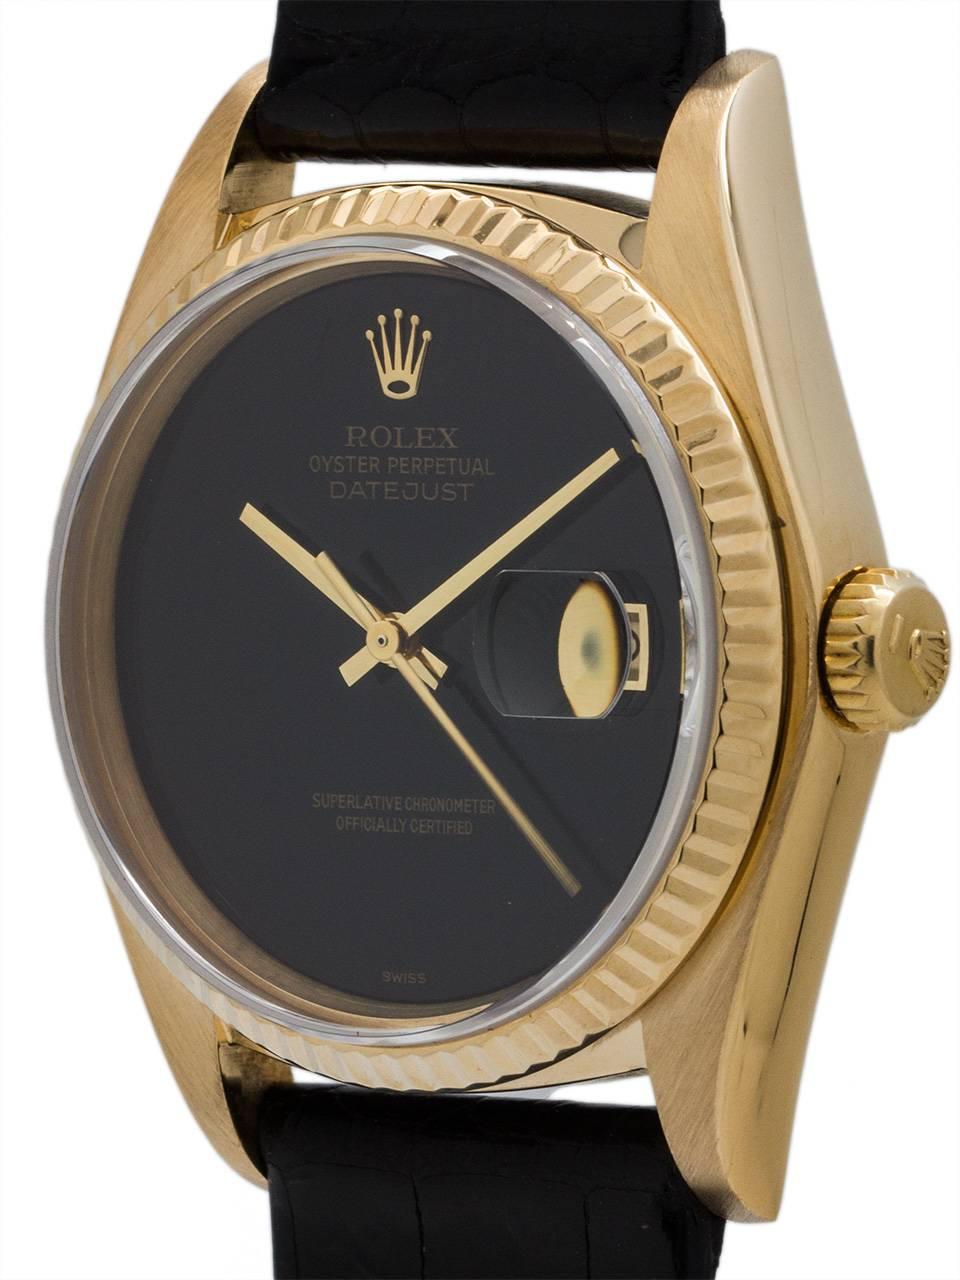 A beautiful condition scarce Rolex 18K gold Datejust ref# 16018 circa 1981 with factory Onyx dial.  Featuring a 36mm diameter case with fluted bezel and sapphire crystal. With stunning factory black onyx dial with applied gold Rolex logo and gilt